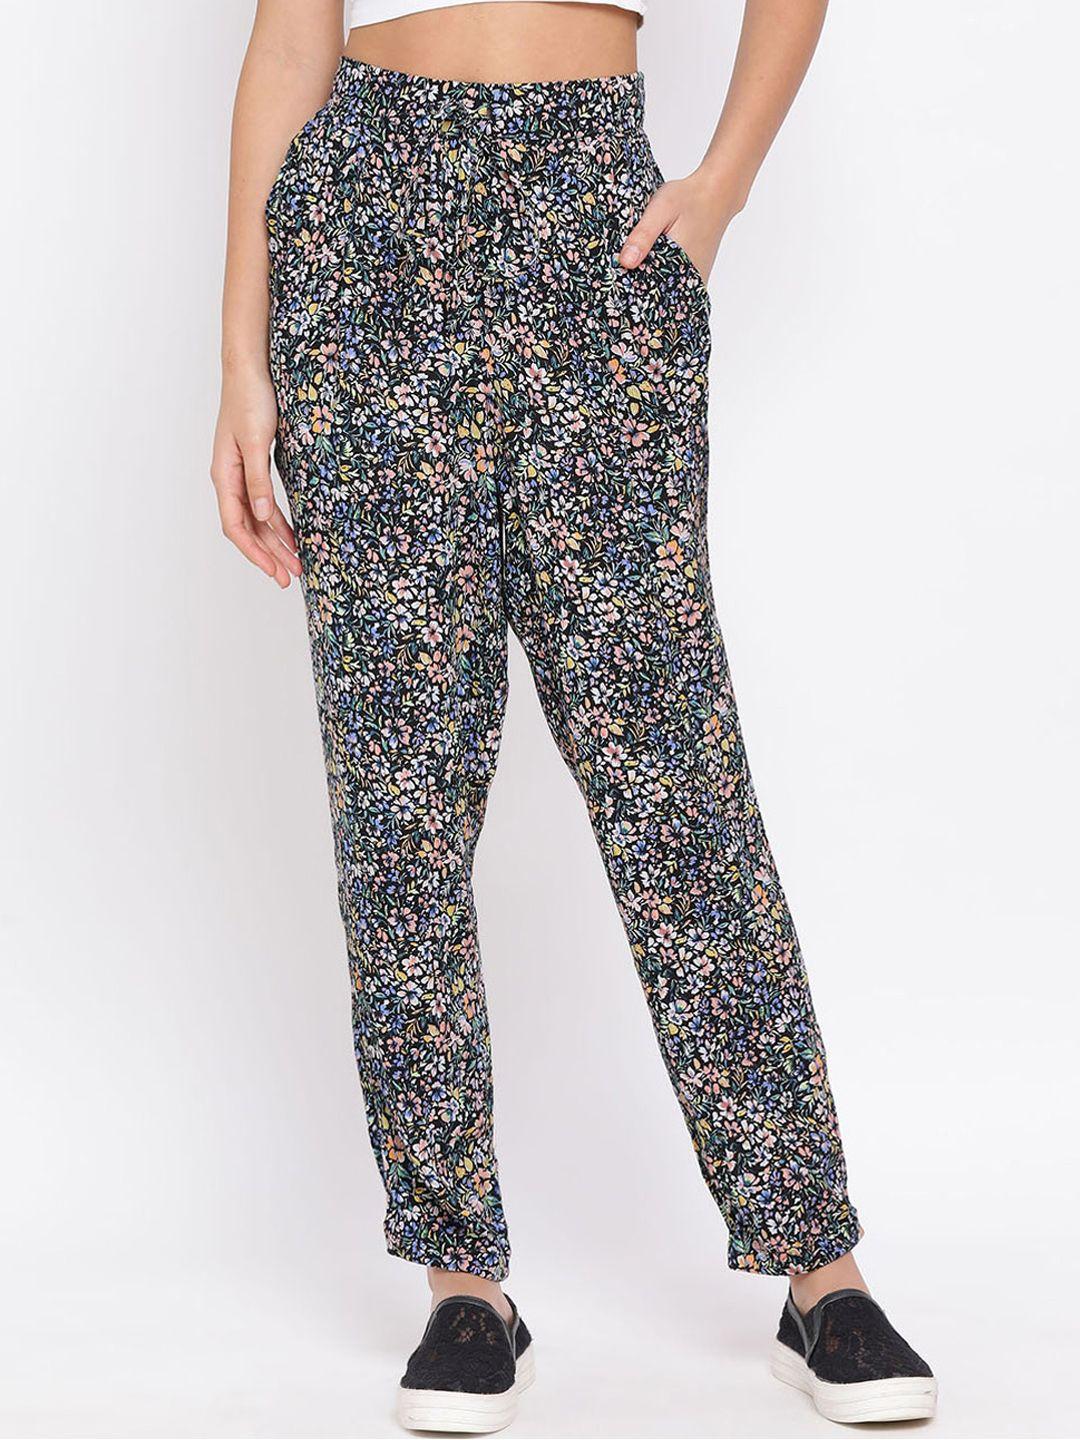 oxolloxo women multicoloured floral printed regular trousers